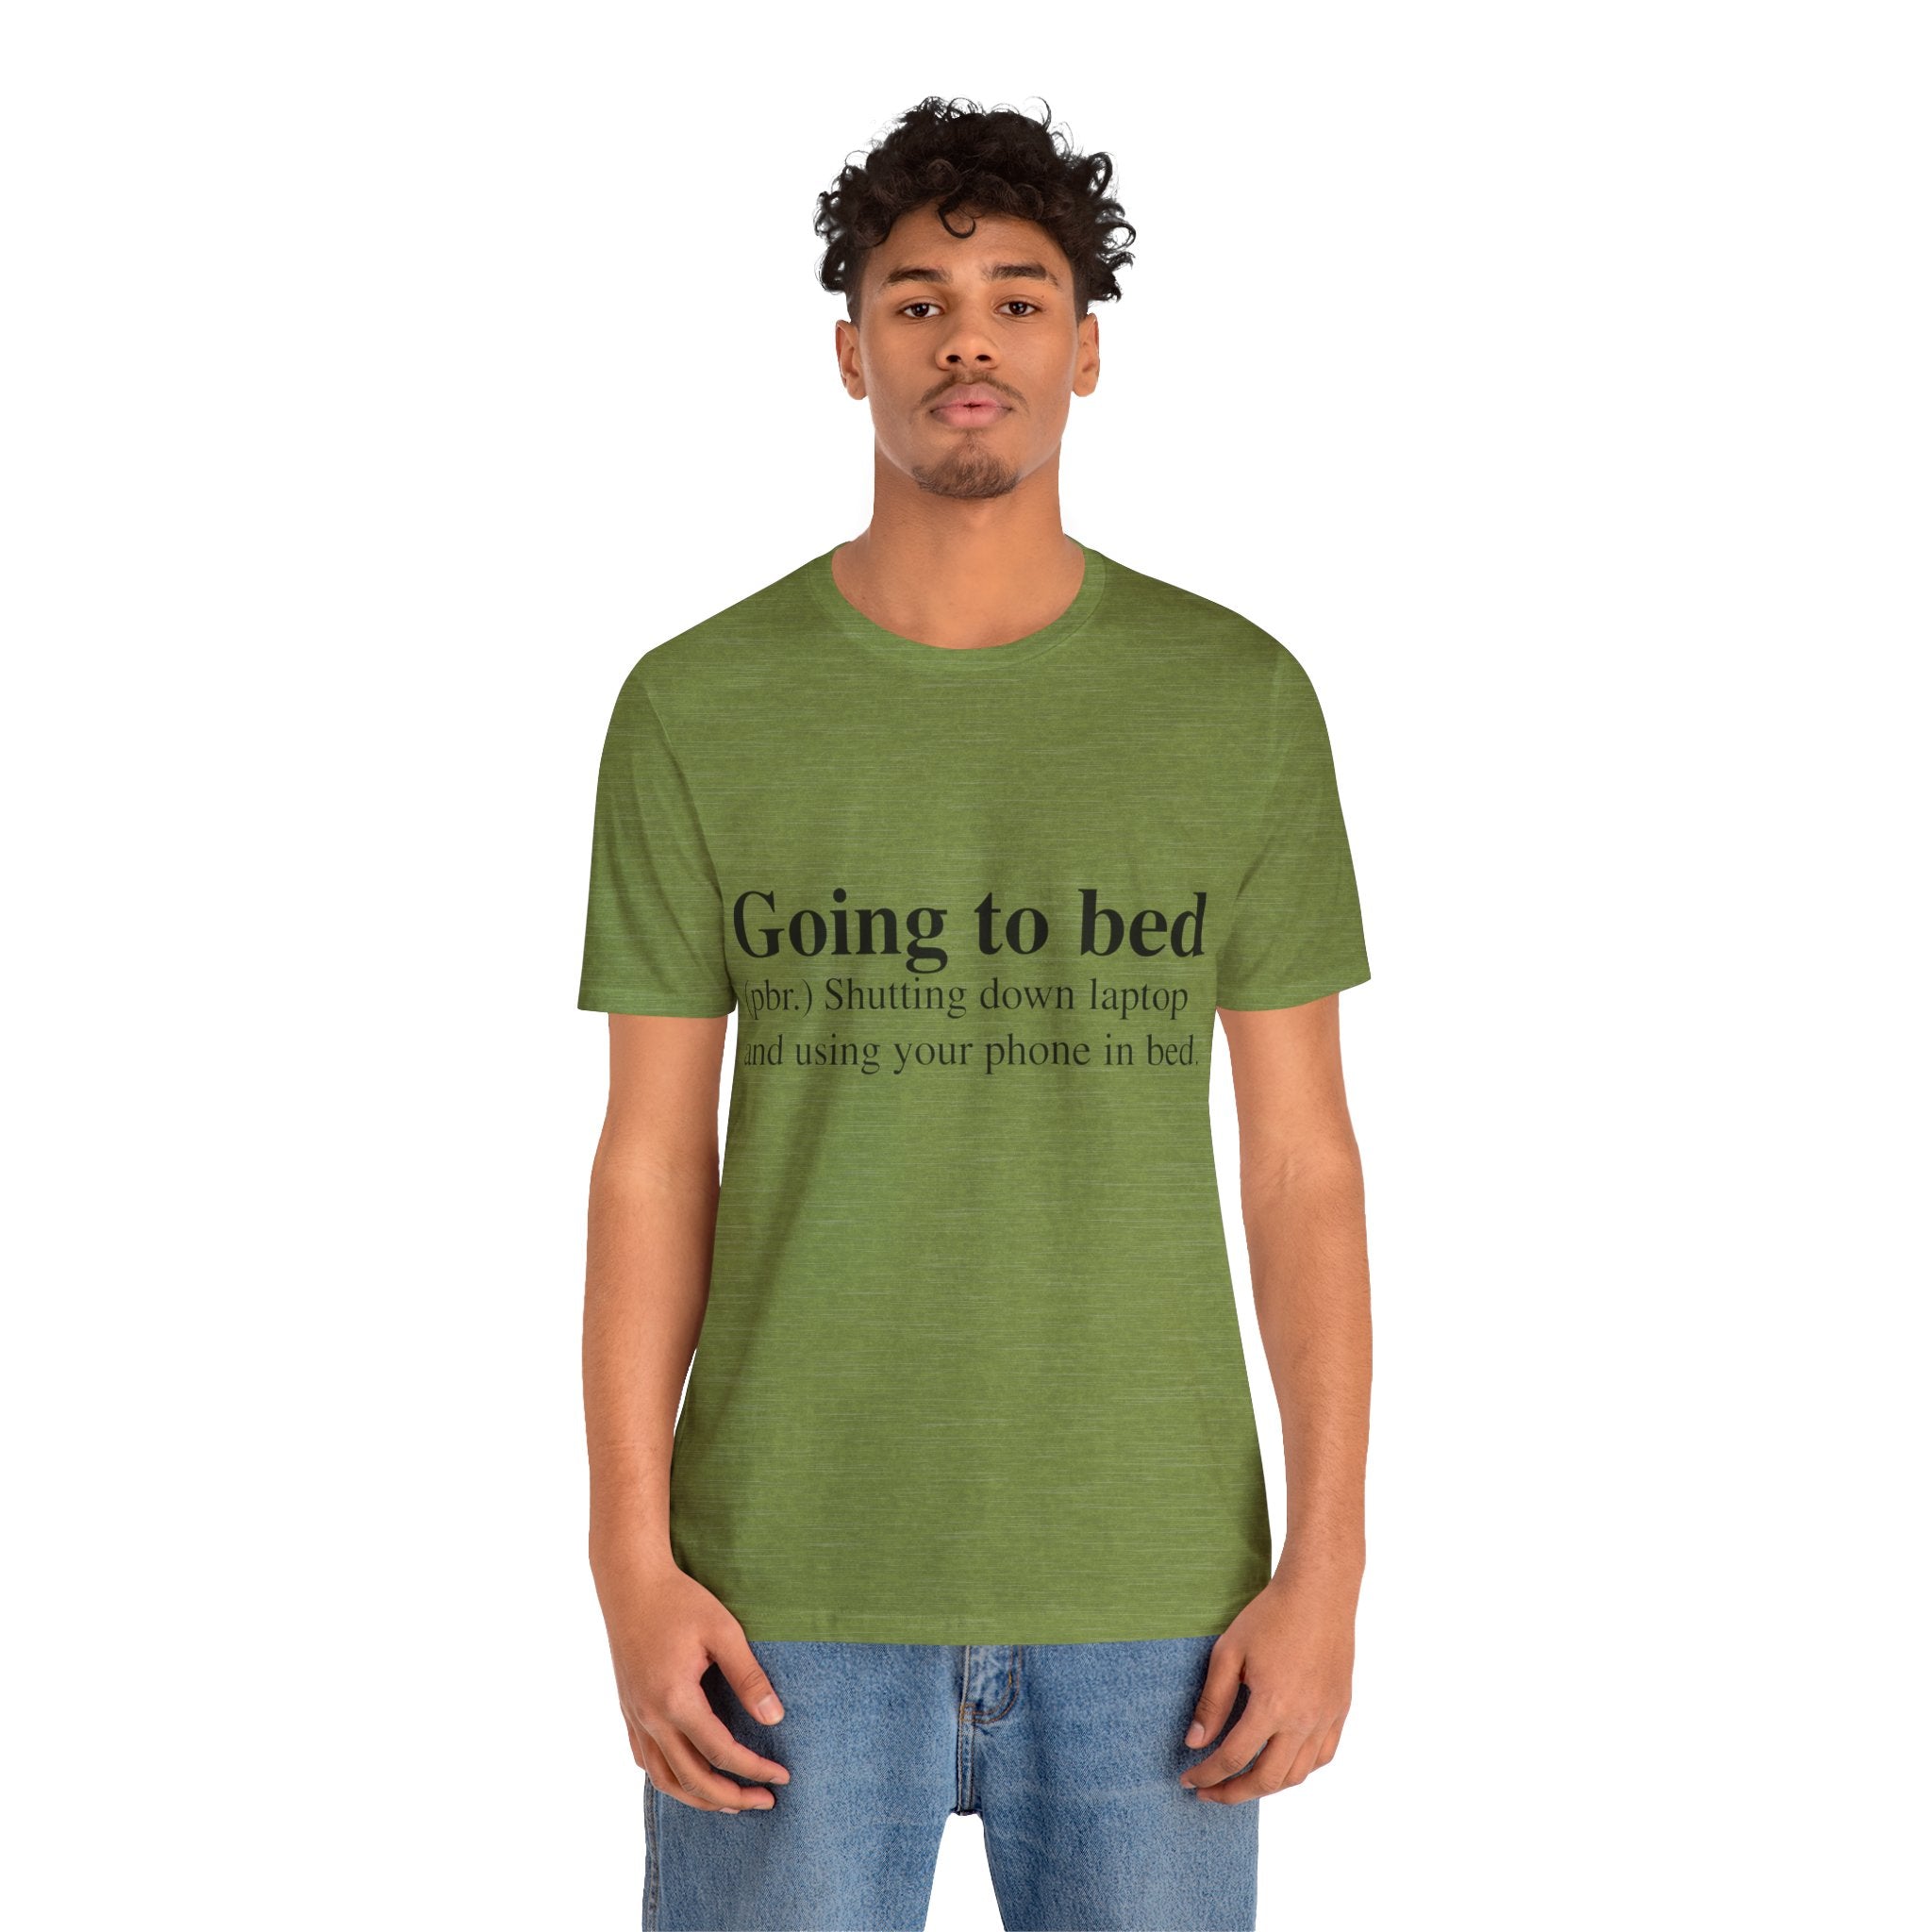 A young man wearing a Going to Bed T-Shirt with the text "going to bed? shutting down laptop and using your phone in bed" printed on it.